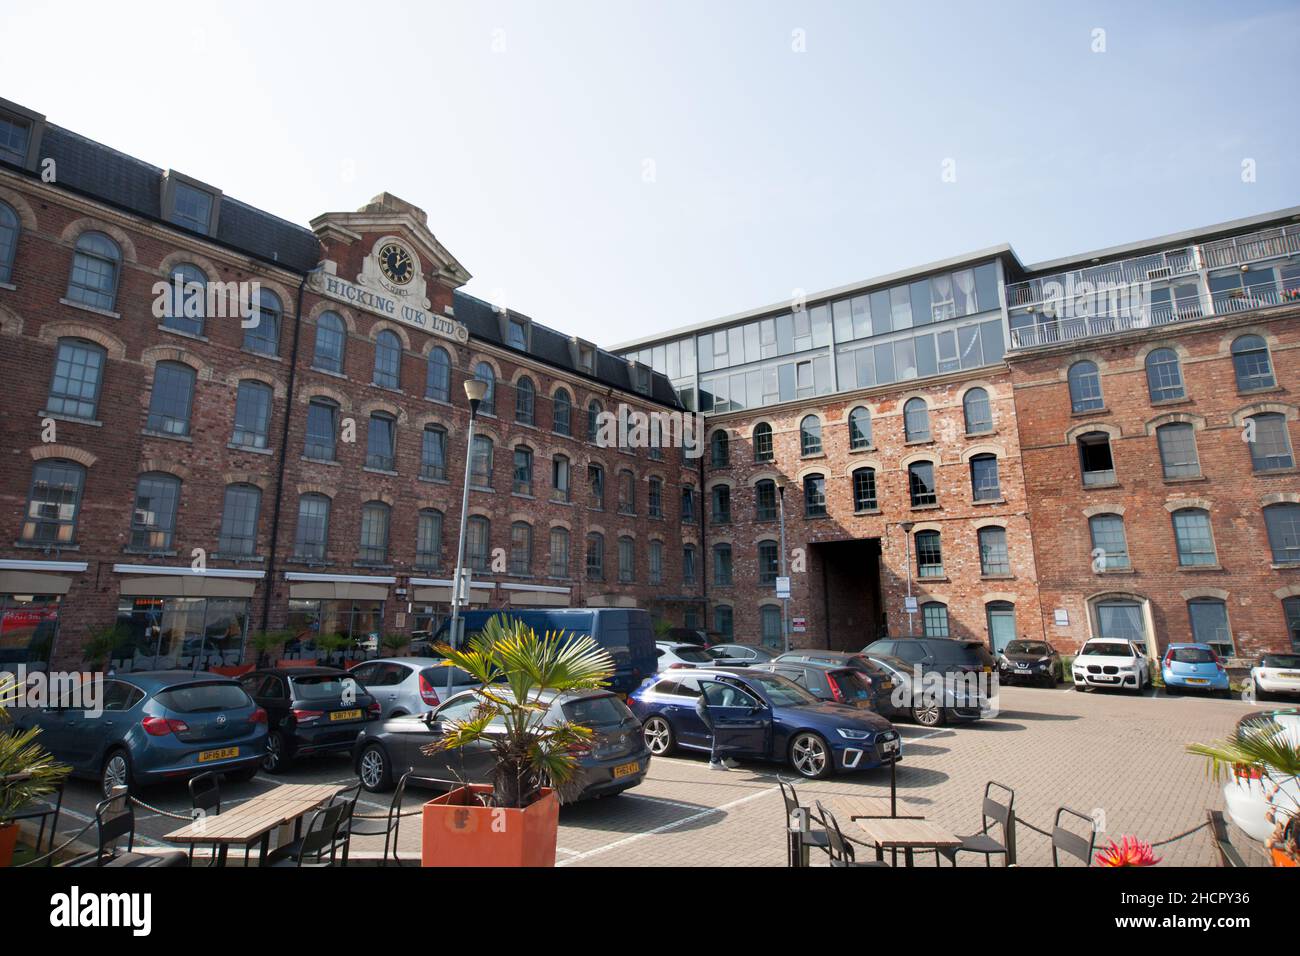 The Hicking building in Nottingham, now used as apartments and a bar and restaurant in the UK - A former warehouse built in 1873. Stock Photo